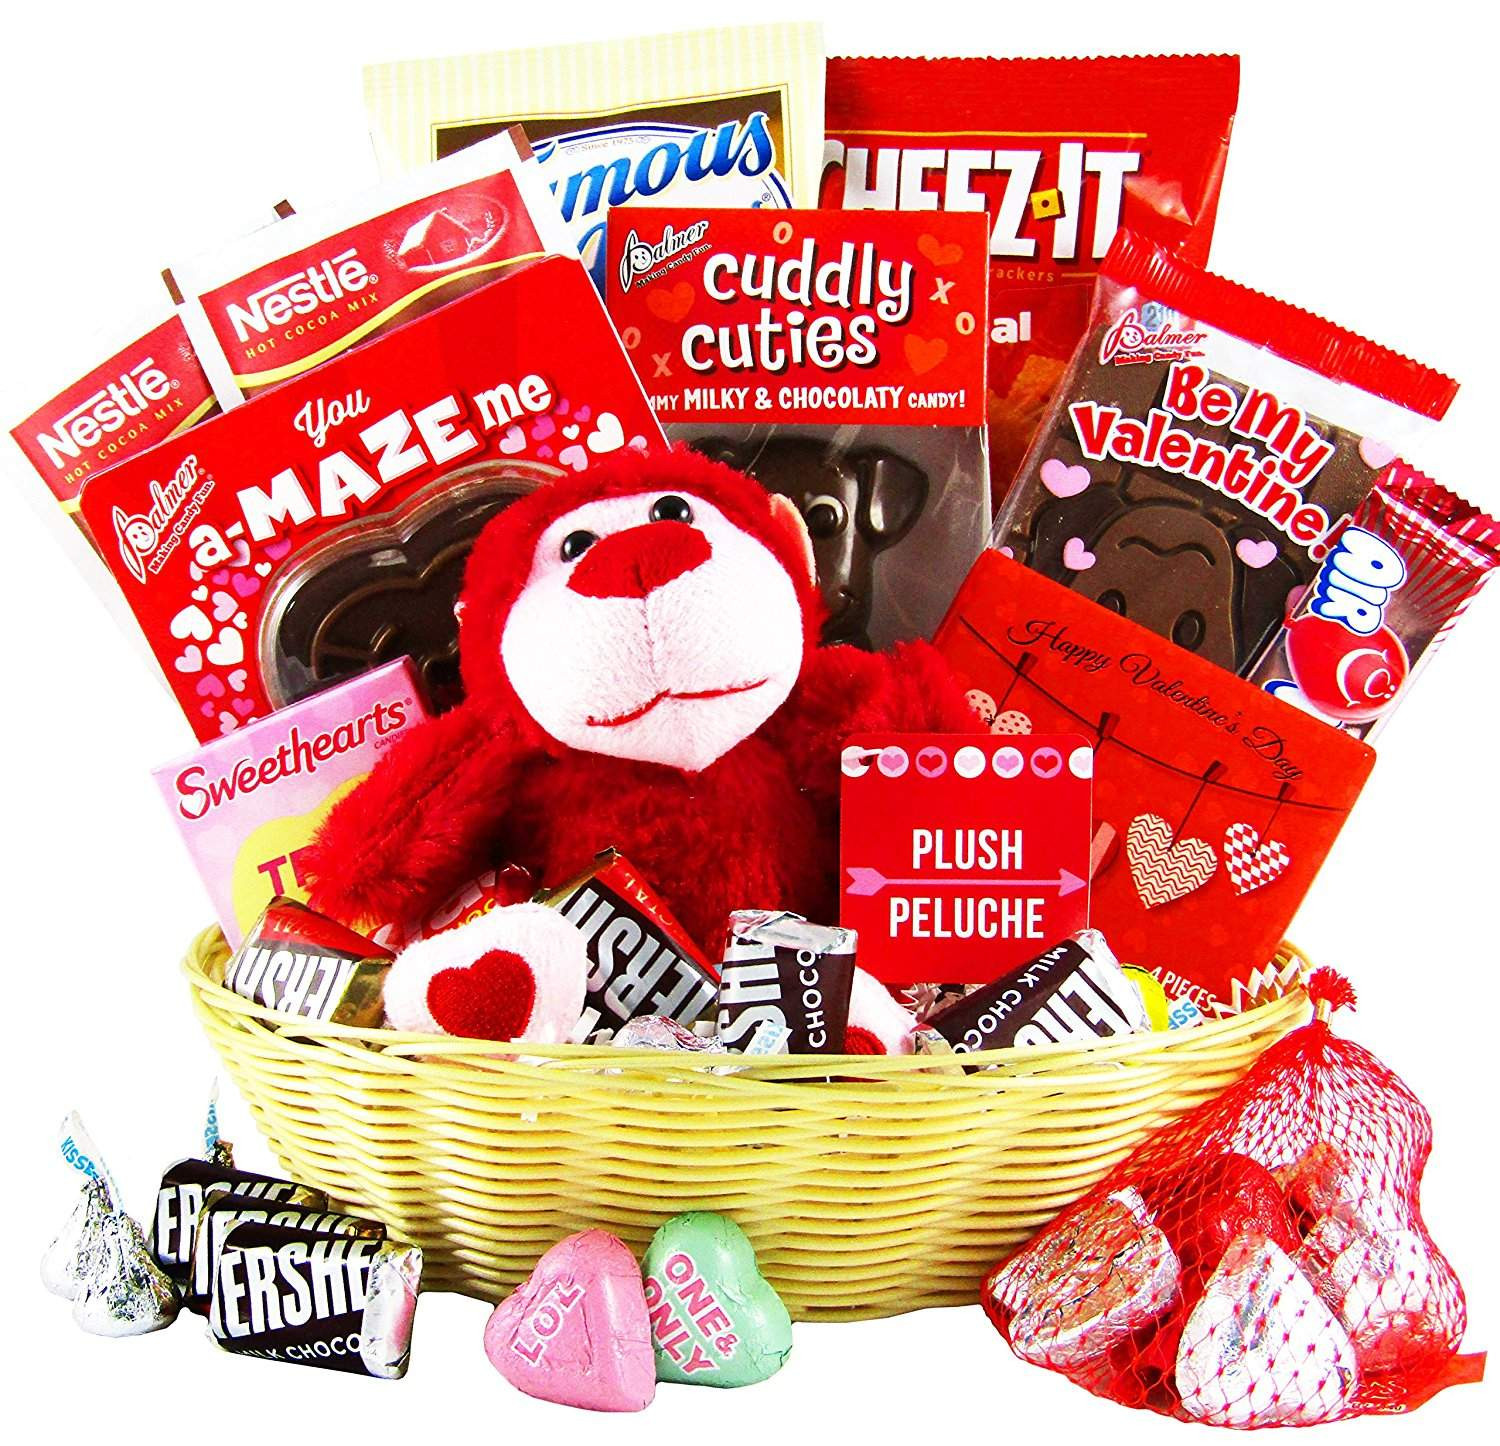 Valentines Day Candy Gift
 Top 10 Best Valentine’s Day Candy Gift Ideas